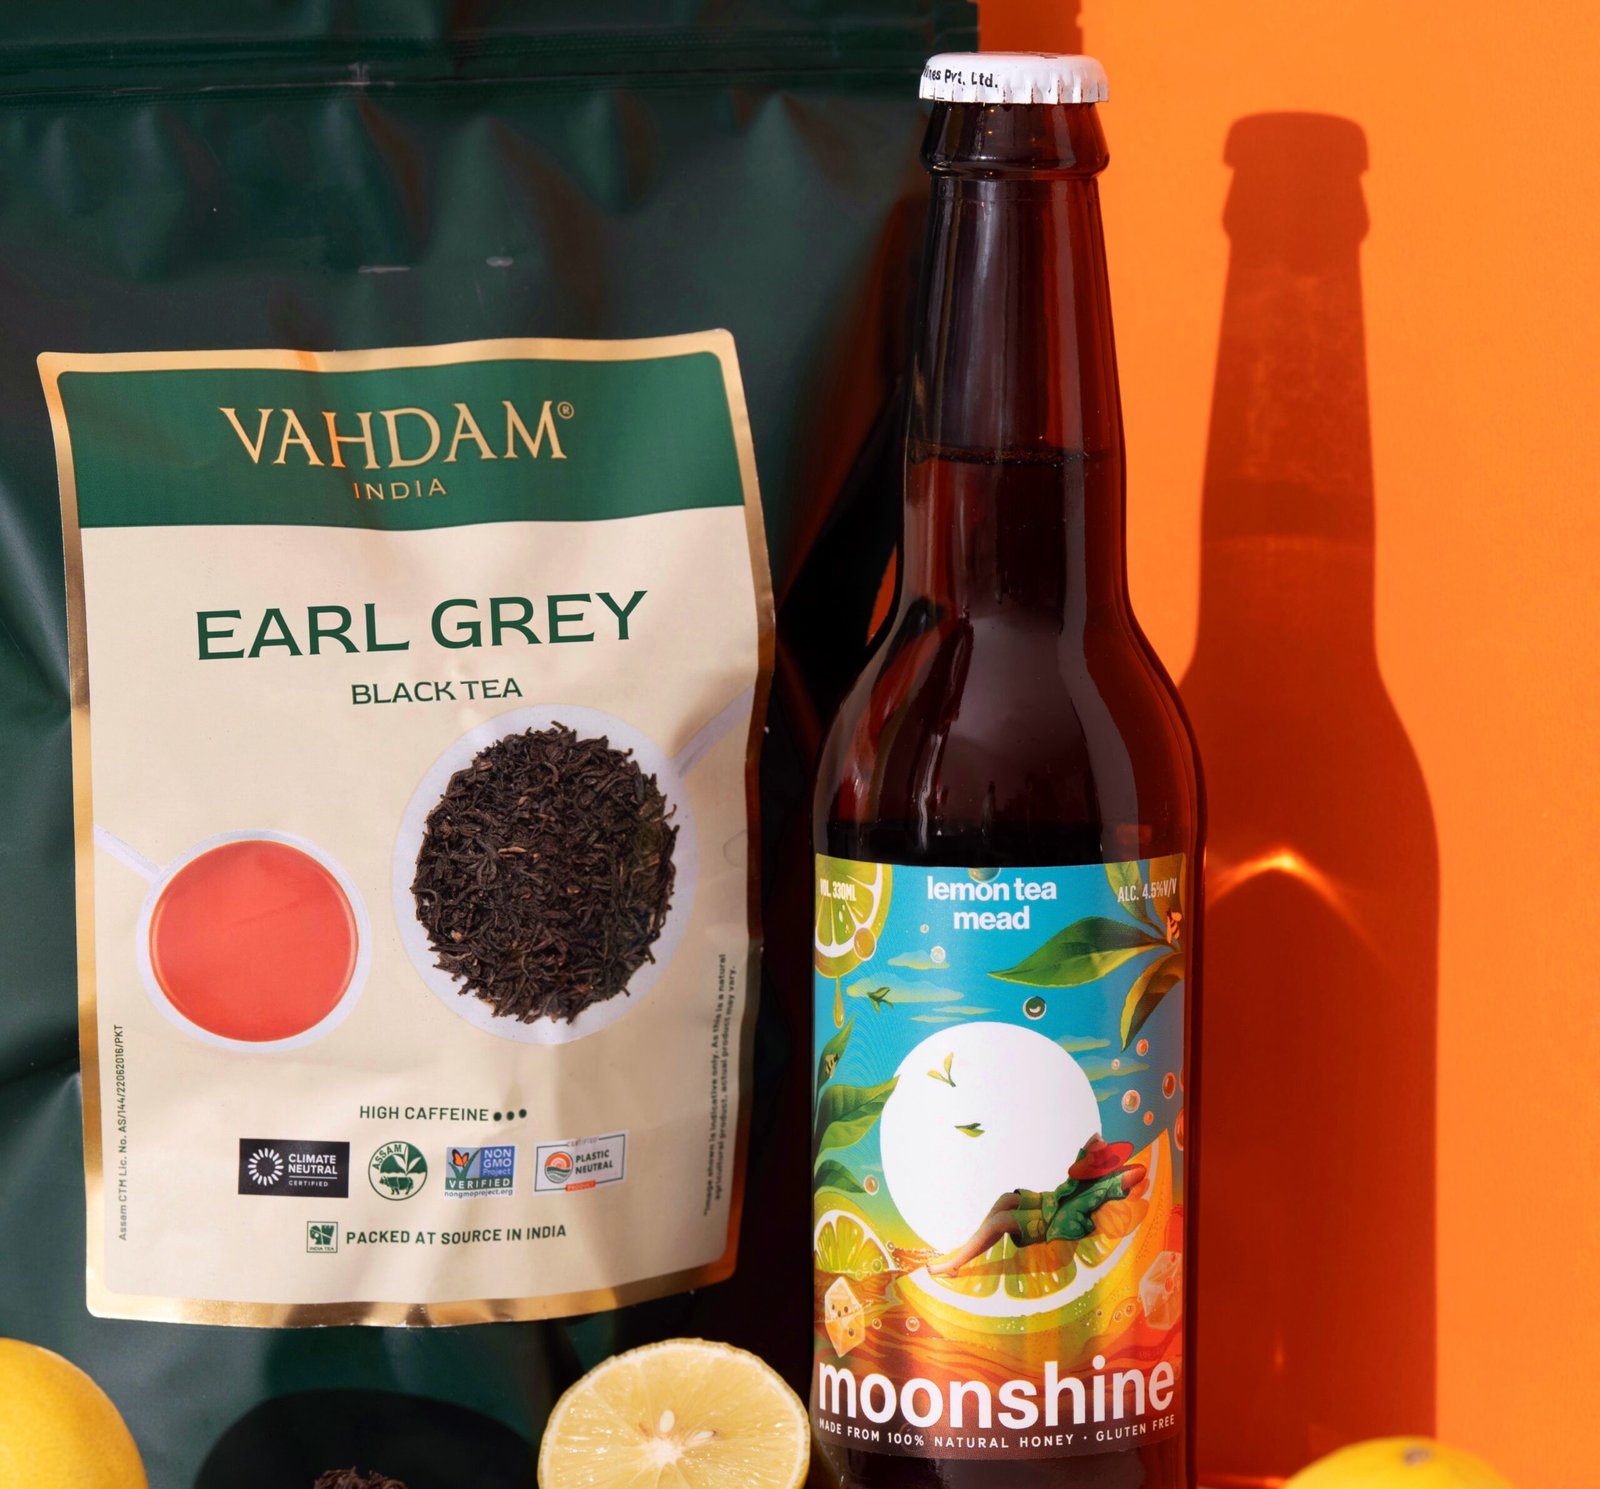 Indian meadery startup launches lemon tea mead